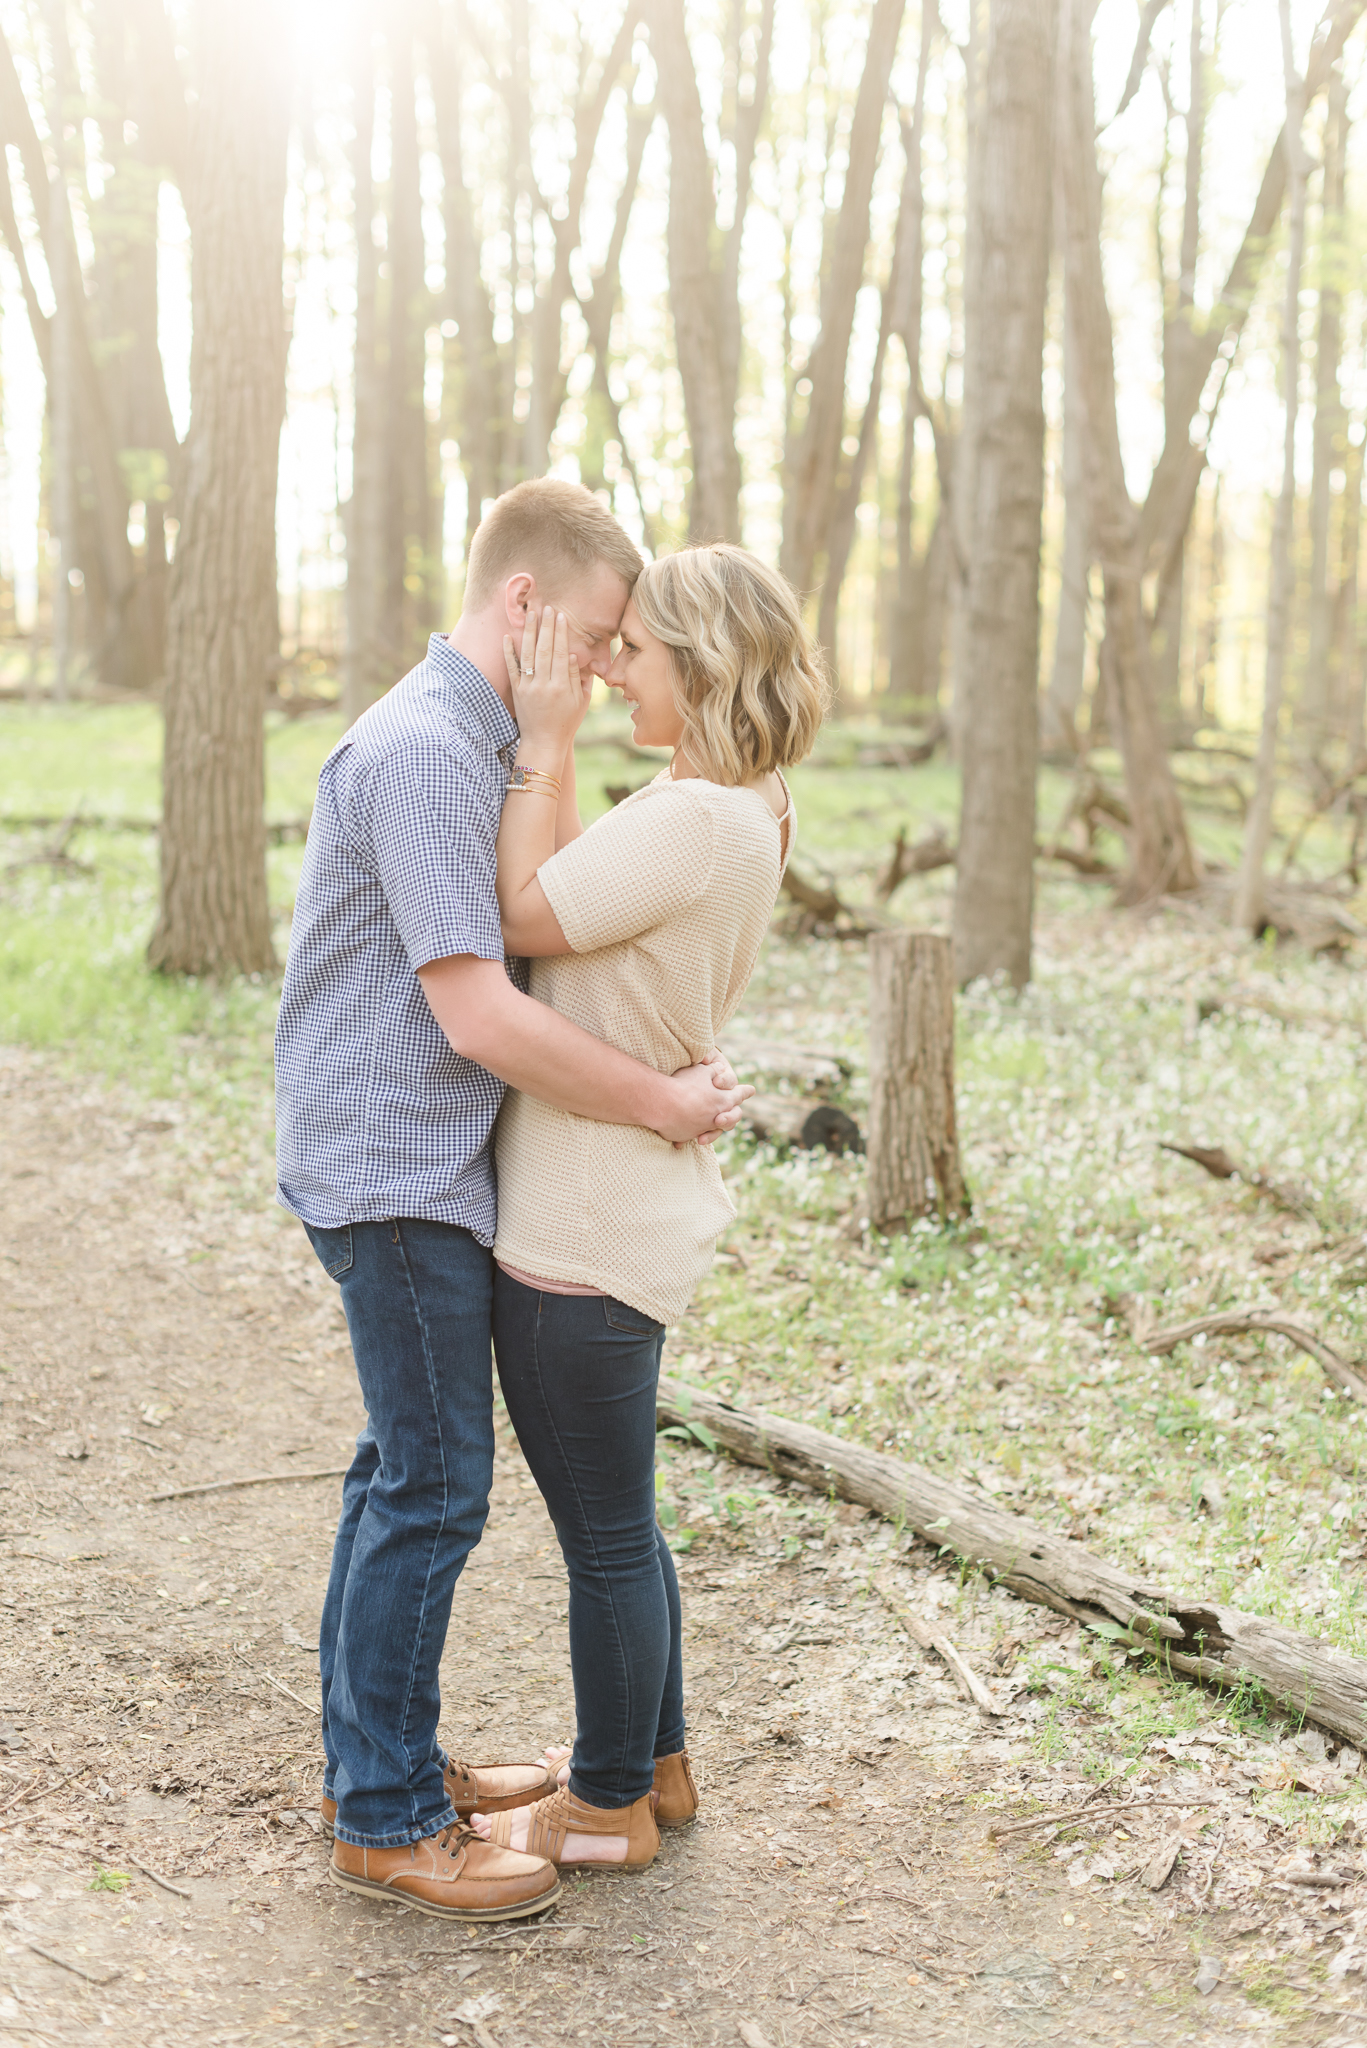 Richie Woods Nature Preserve and Mustard Seed Gardens Engagement Session Wedding Photos-30.jpg